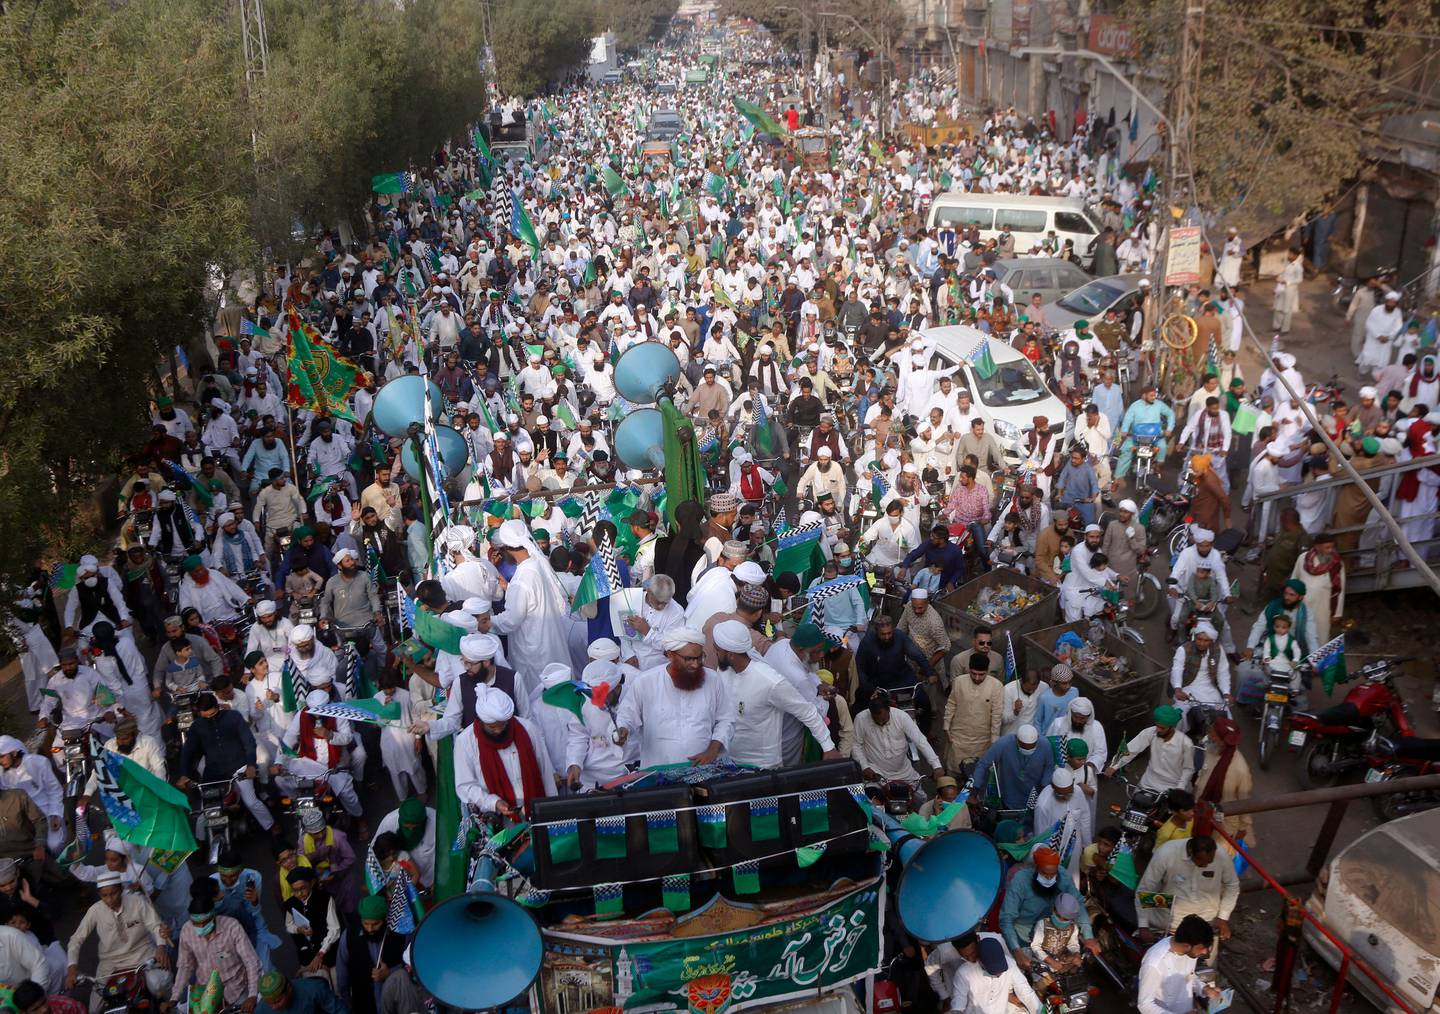 Supporters of religious group take part in a rally against French President Emmanuel Macron and republishing of caricatures of the Prophet Muhammad they deem blasphemous, in Lahore, Pakistan, Friday, Oct. 30, 2020. Muslims have been calling for both protests and a boycott of French goods in response to France's stance on caricatures of Islam's most revered prophet. (AP Photo/K.M. Chaudary)